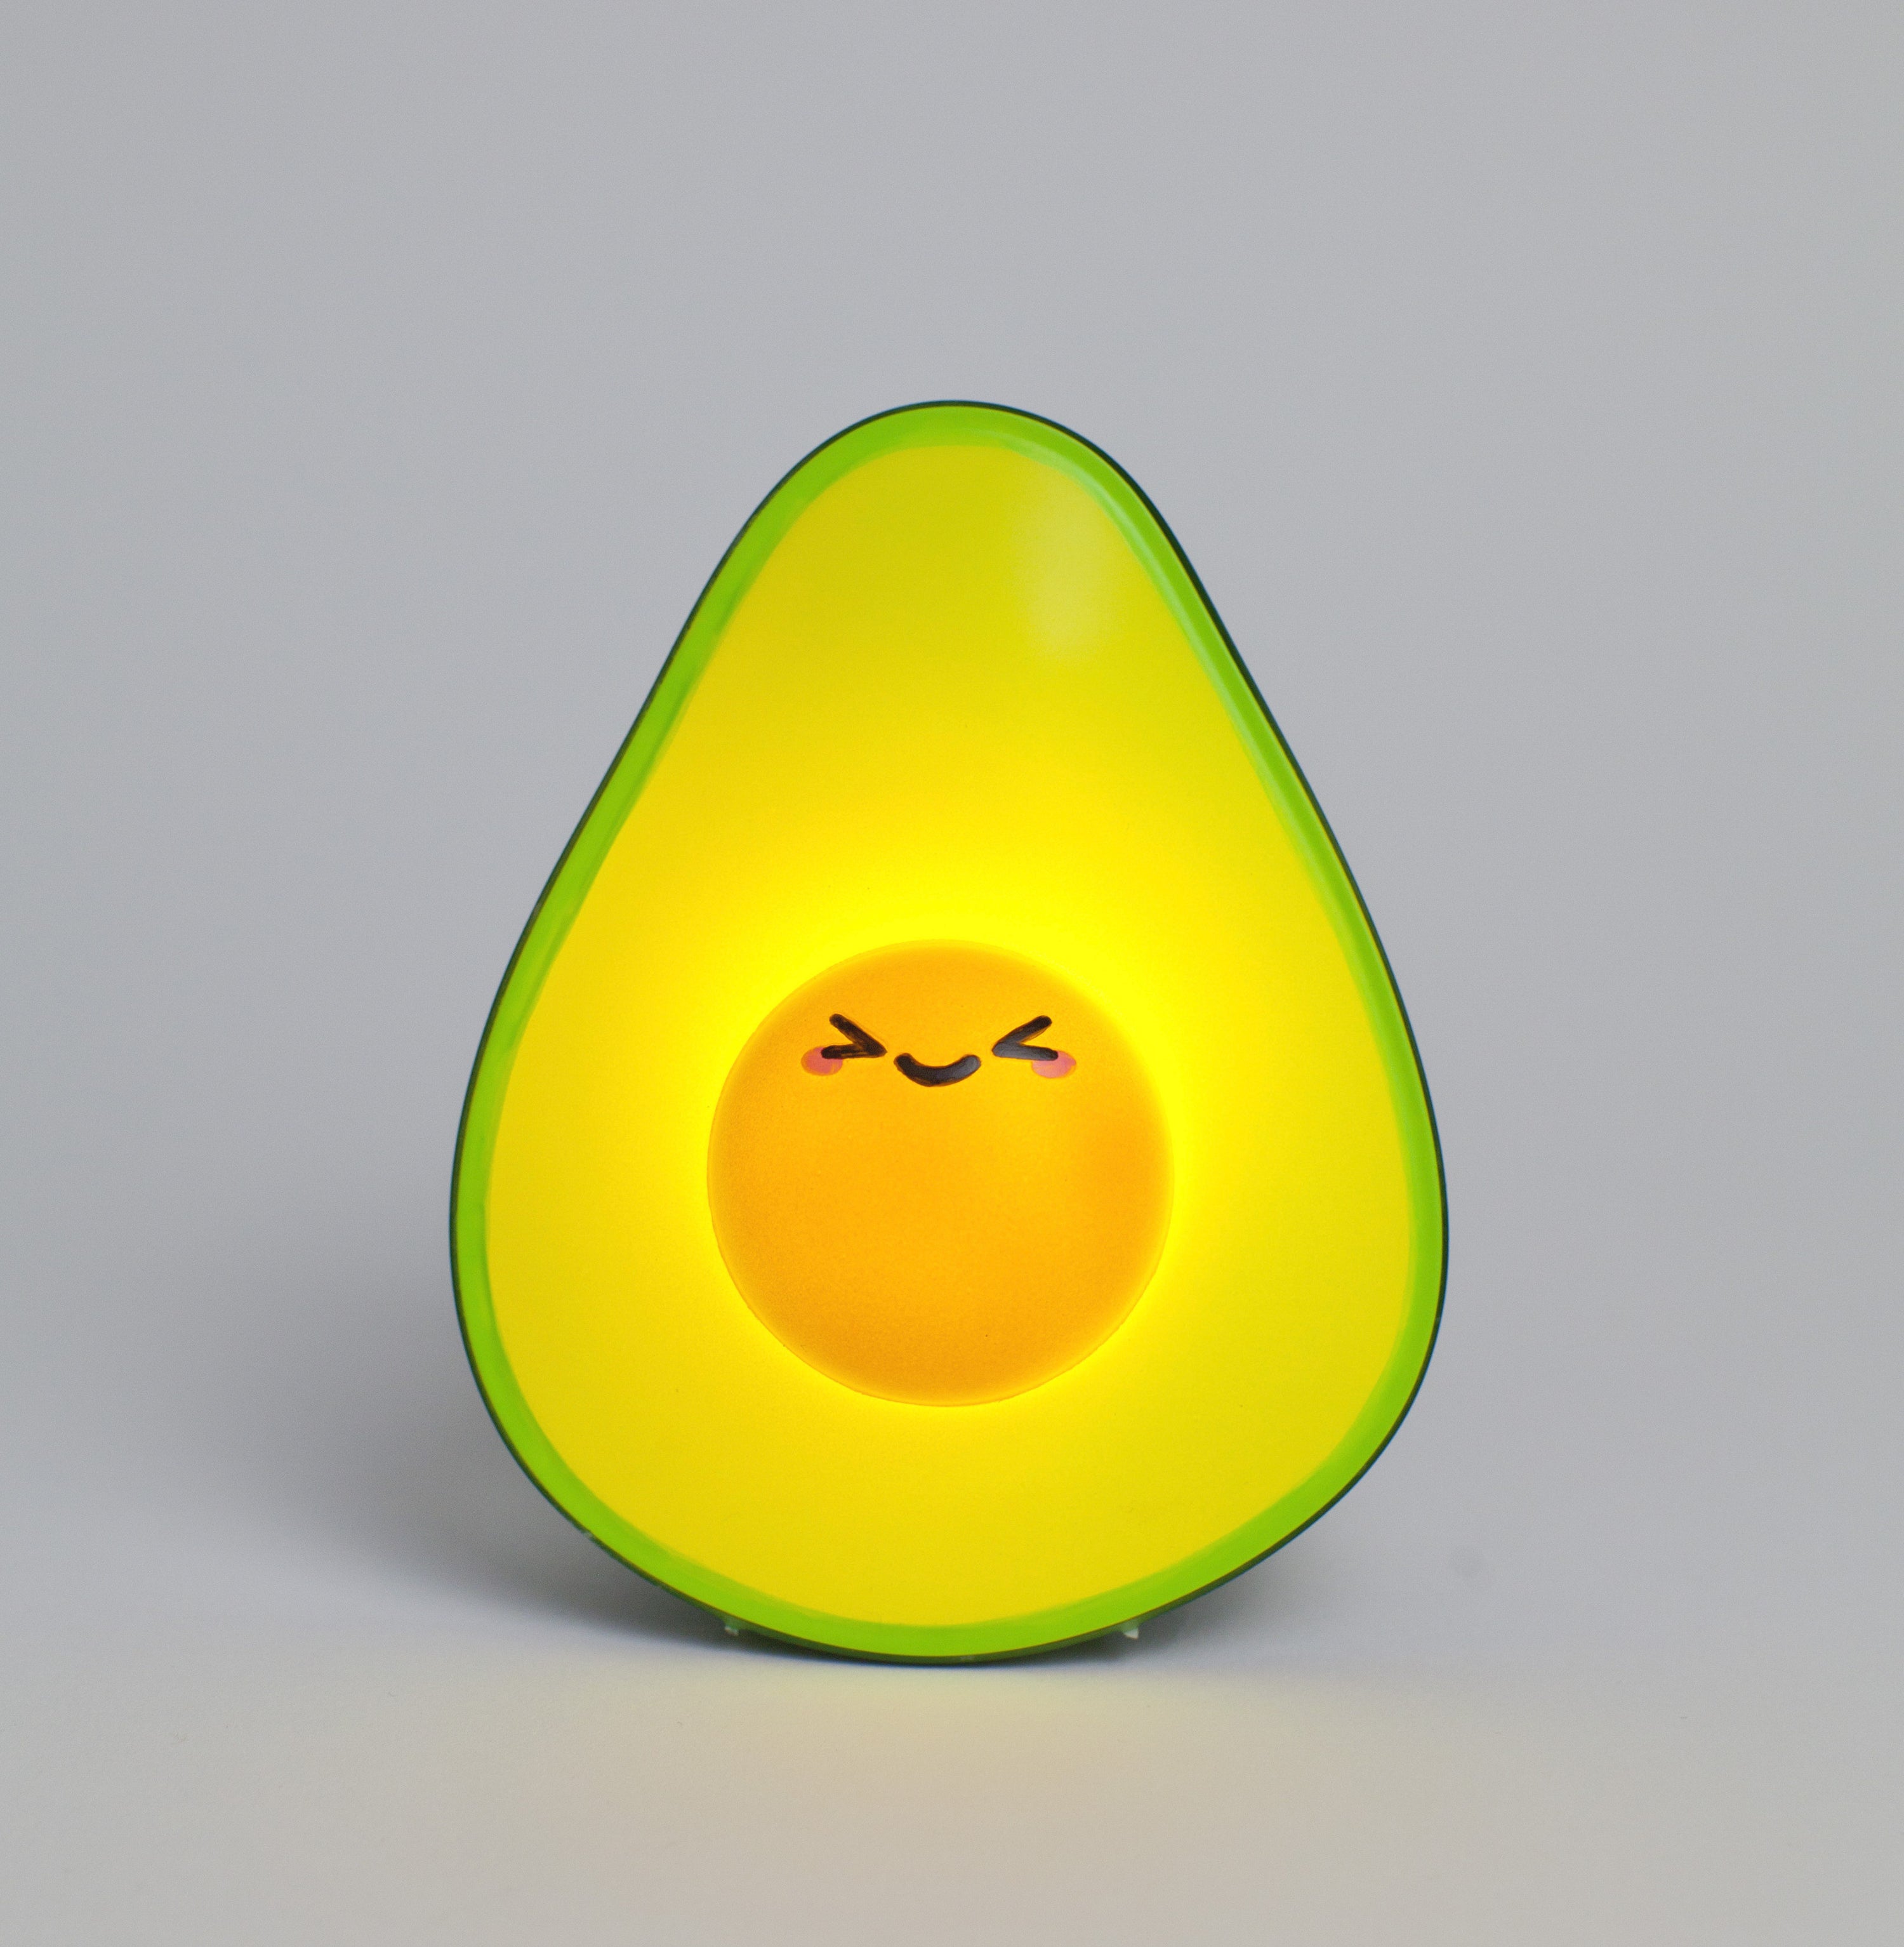 The LED light-up avocado with happy illustrated face